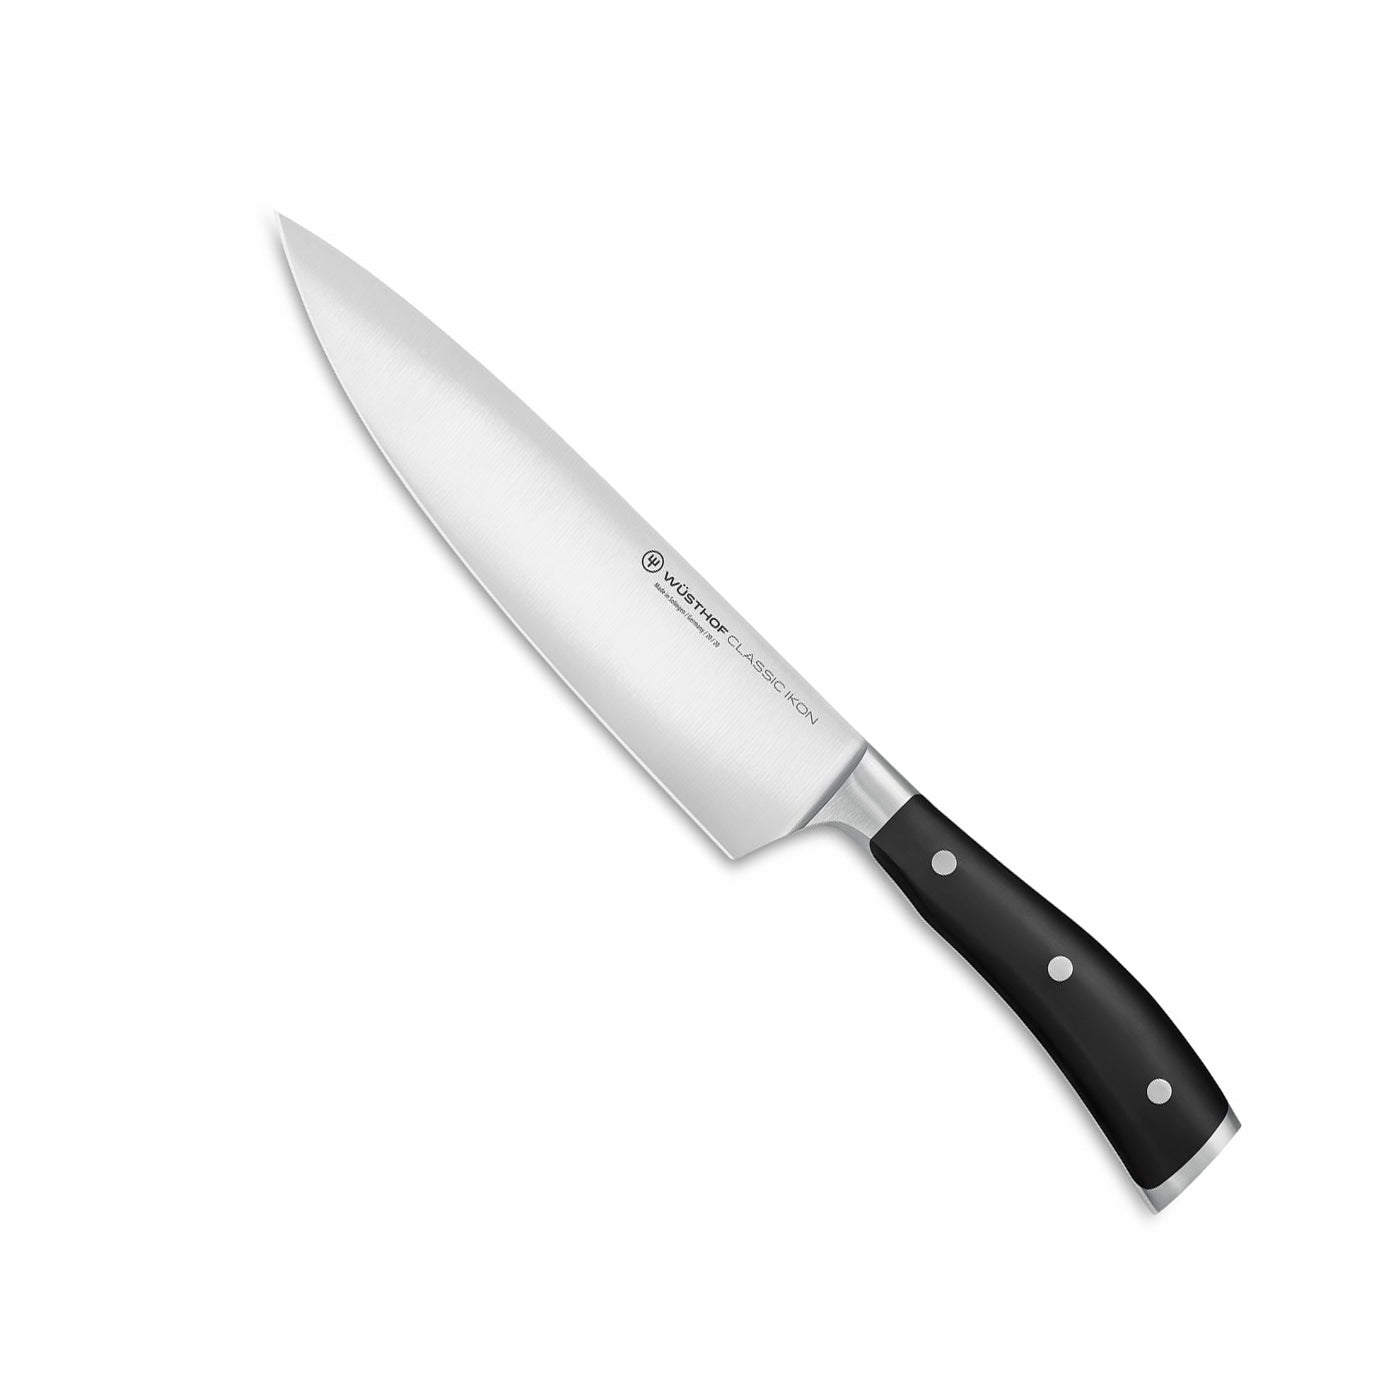 Wusthof Classic Ikon Carving Knife 8 inch Crème